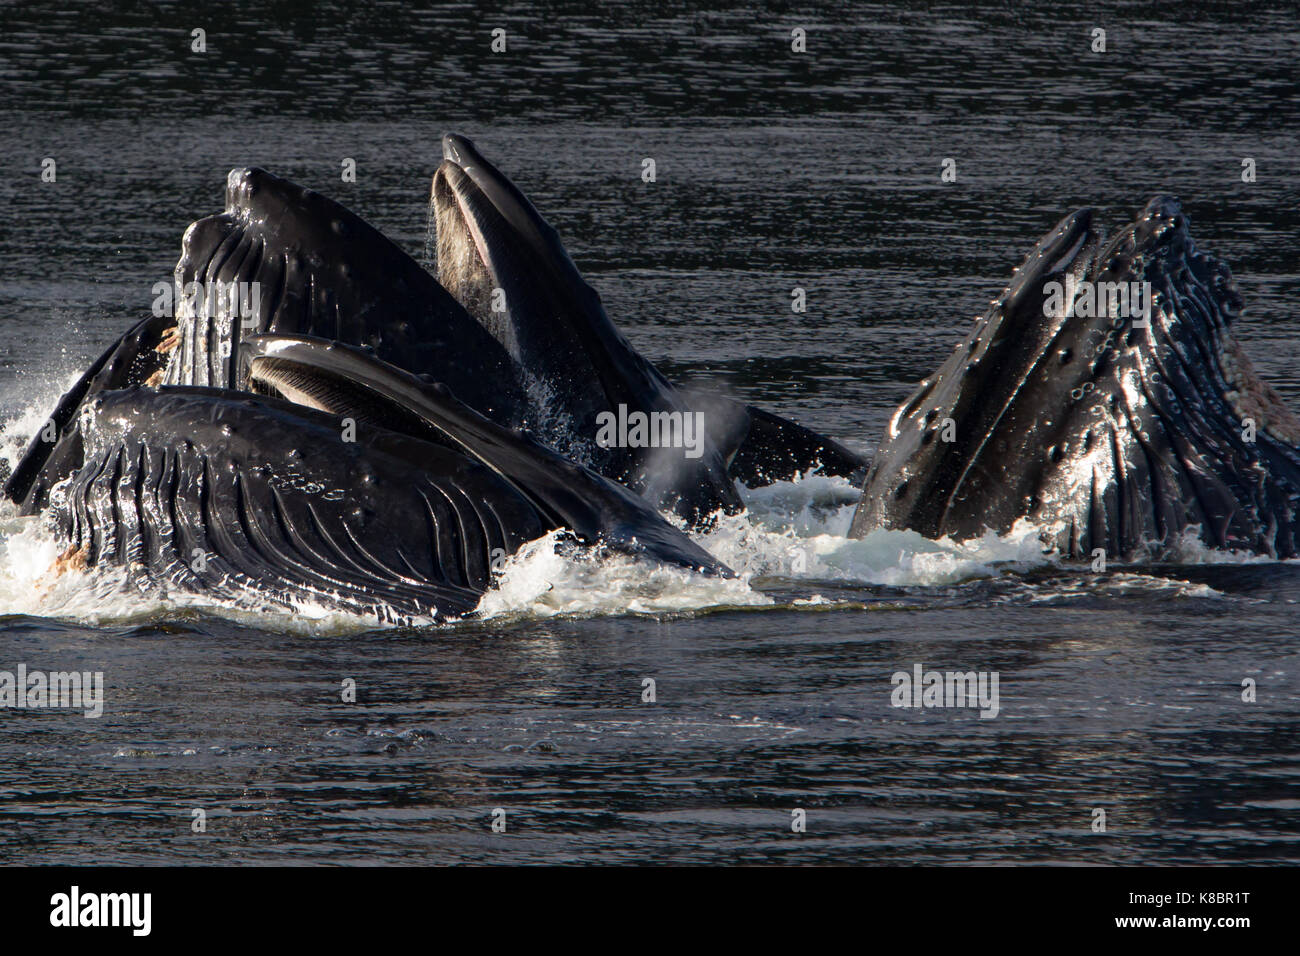 Humpback whales work together in cooperative bubble net feeding to eat herring in Southeast Alaska, USA Stock Photo